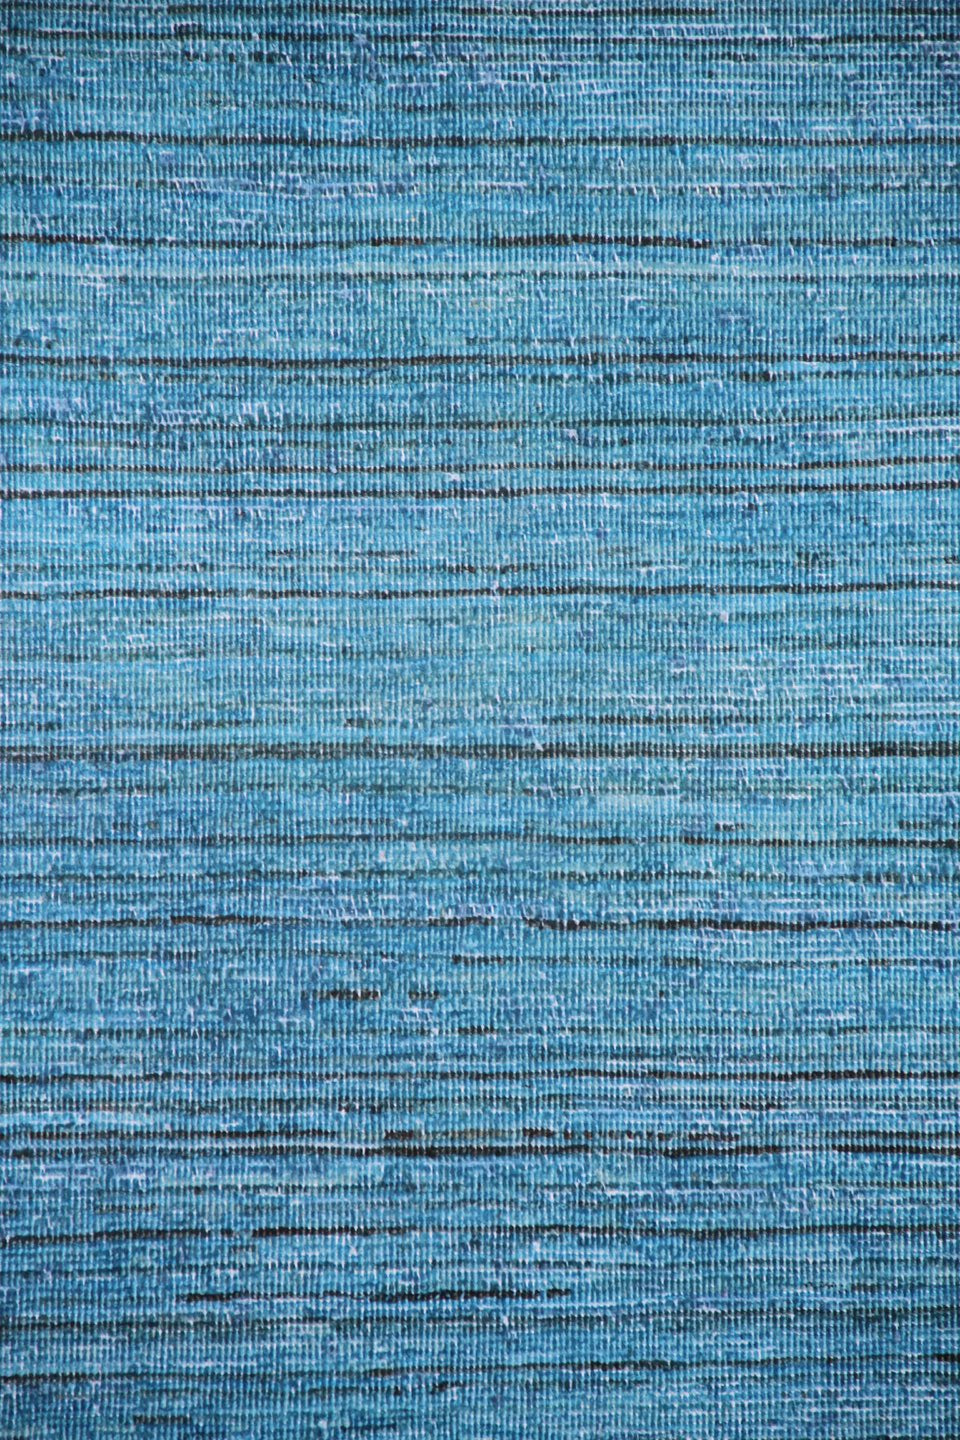 6'x9' Striped Blue Hand-Knotted Ariana Overdyed Area Rug